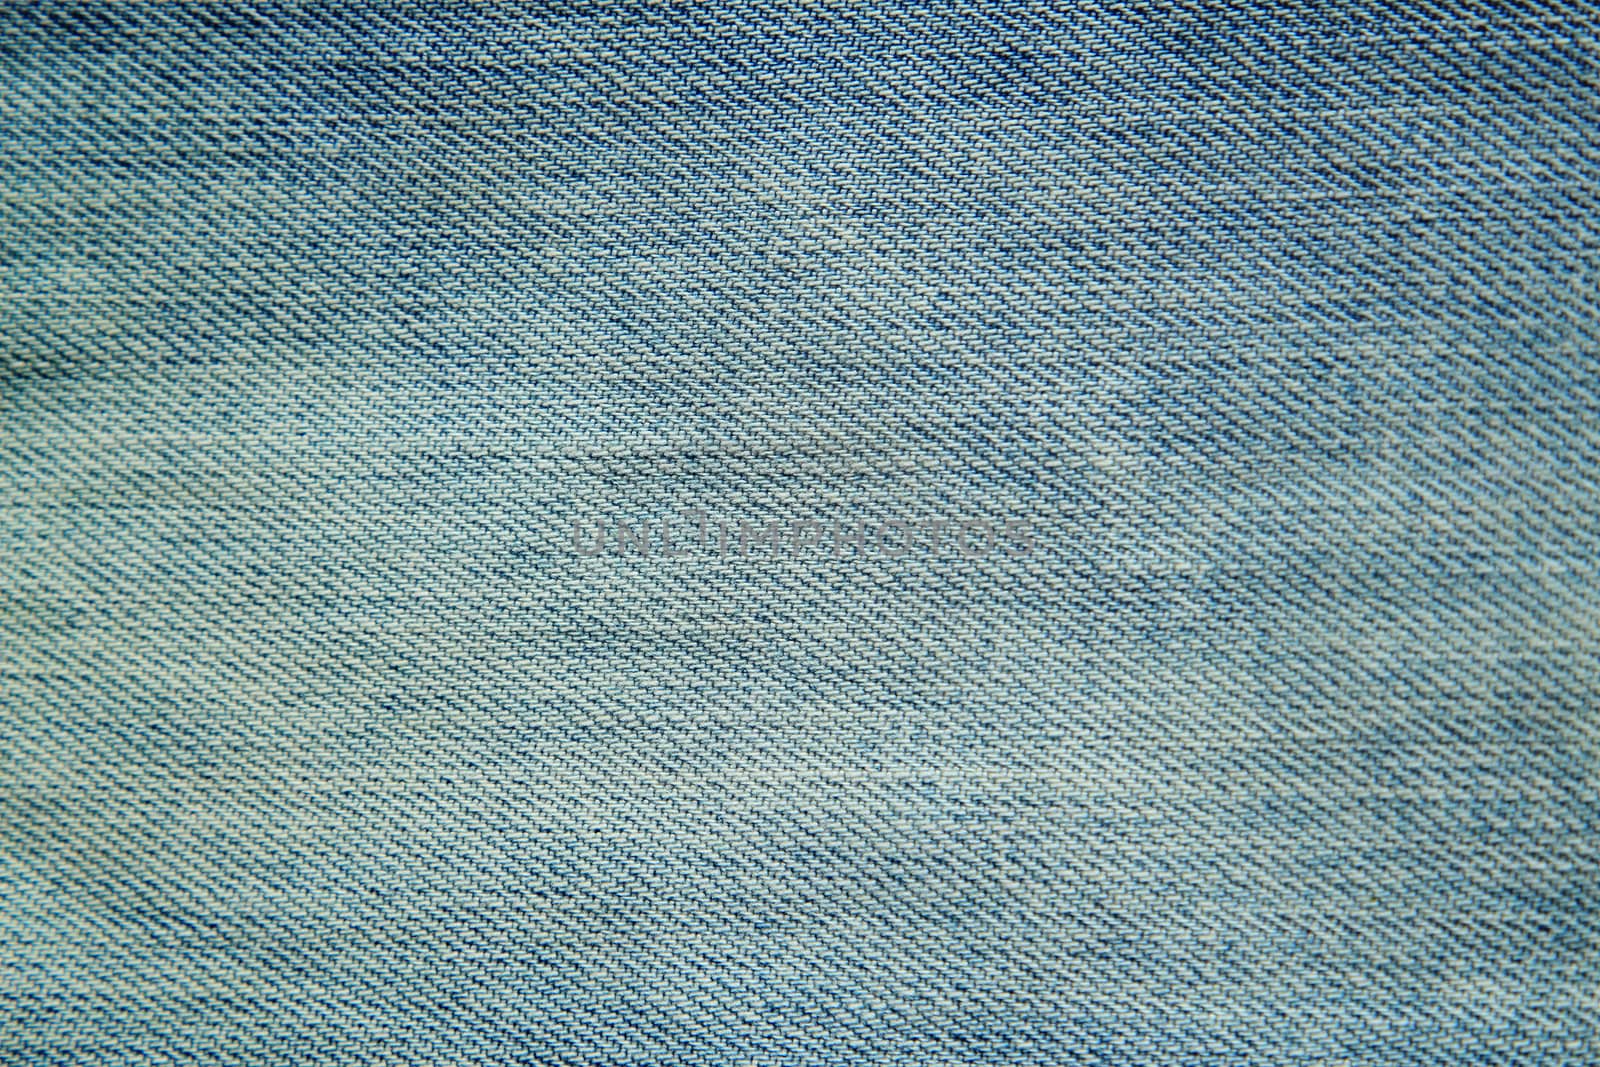 Blue jeans texture background by foto76